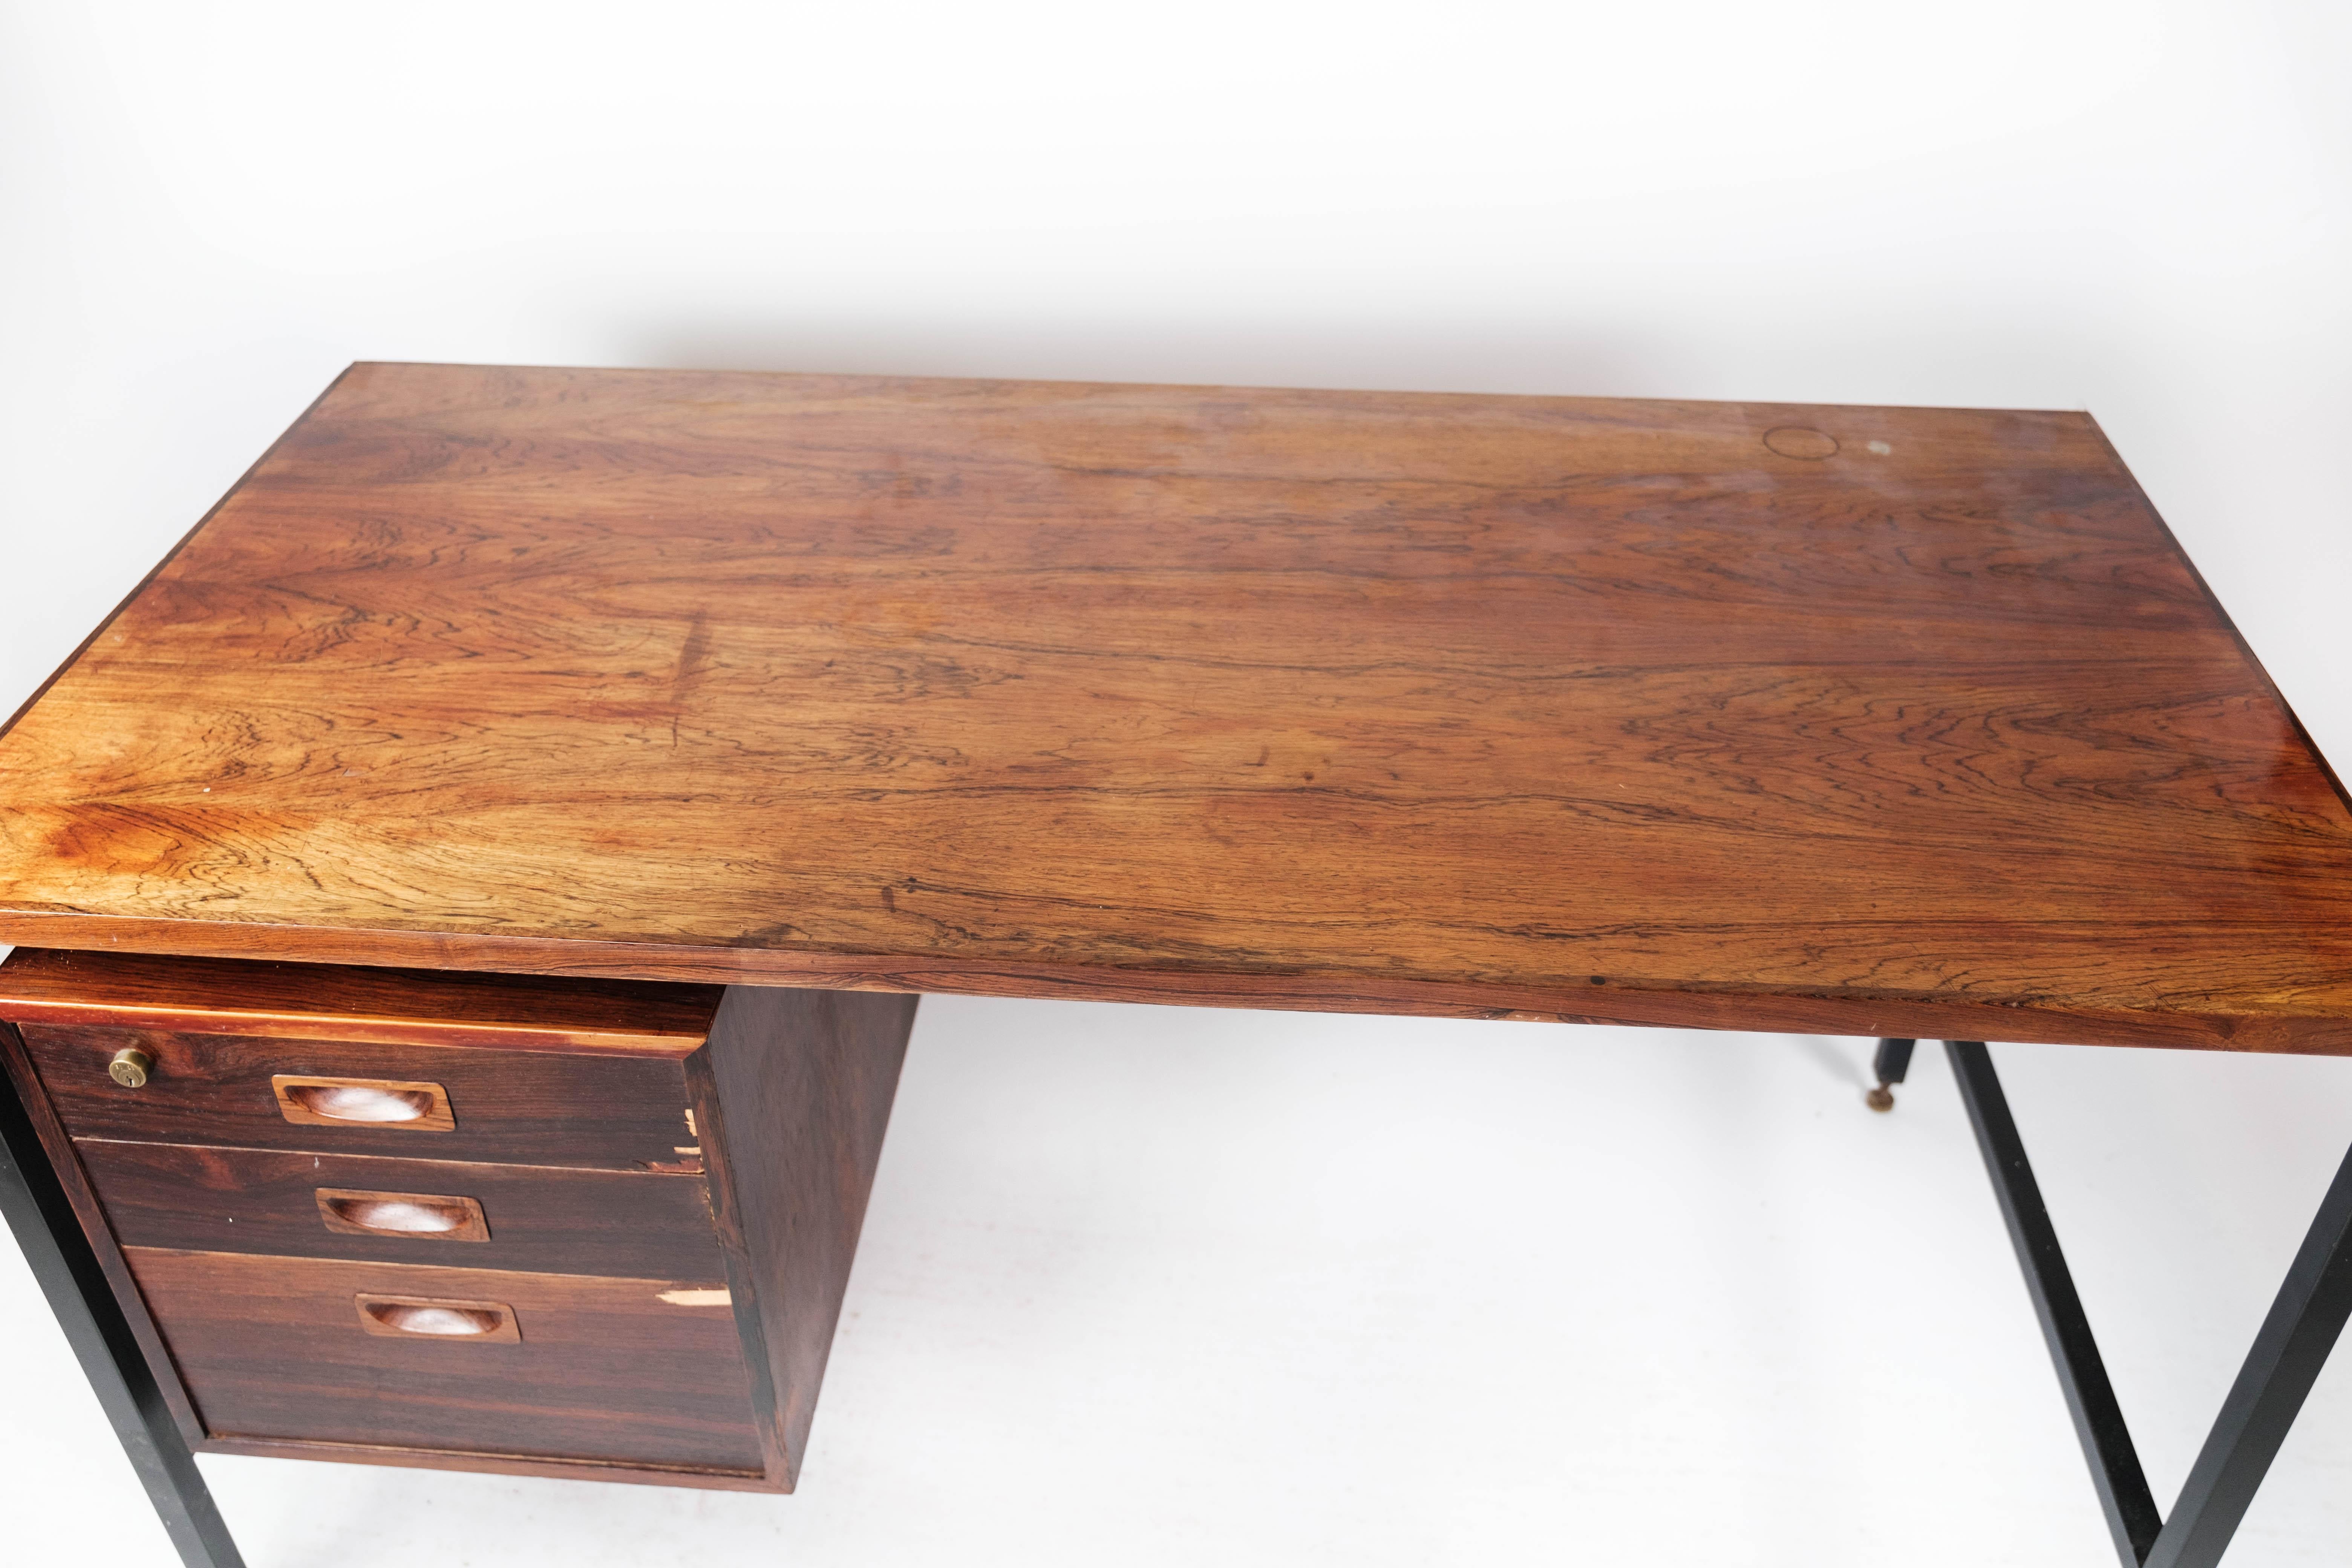 Desk in rosewood and legs in metal, of Danish design from the 1960s. The table is in great vintage condition.